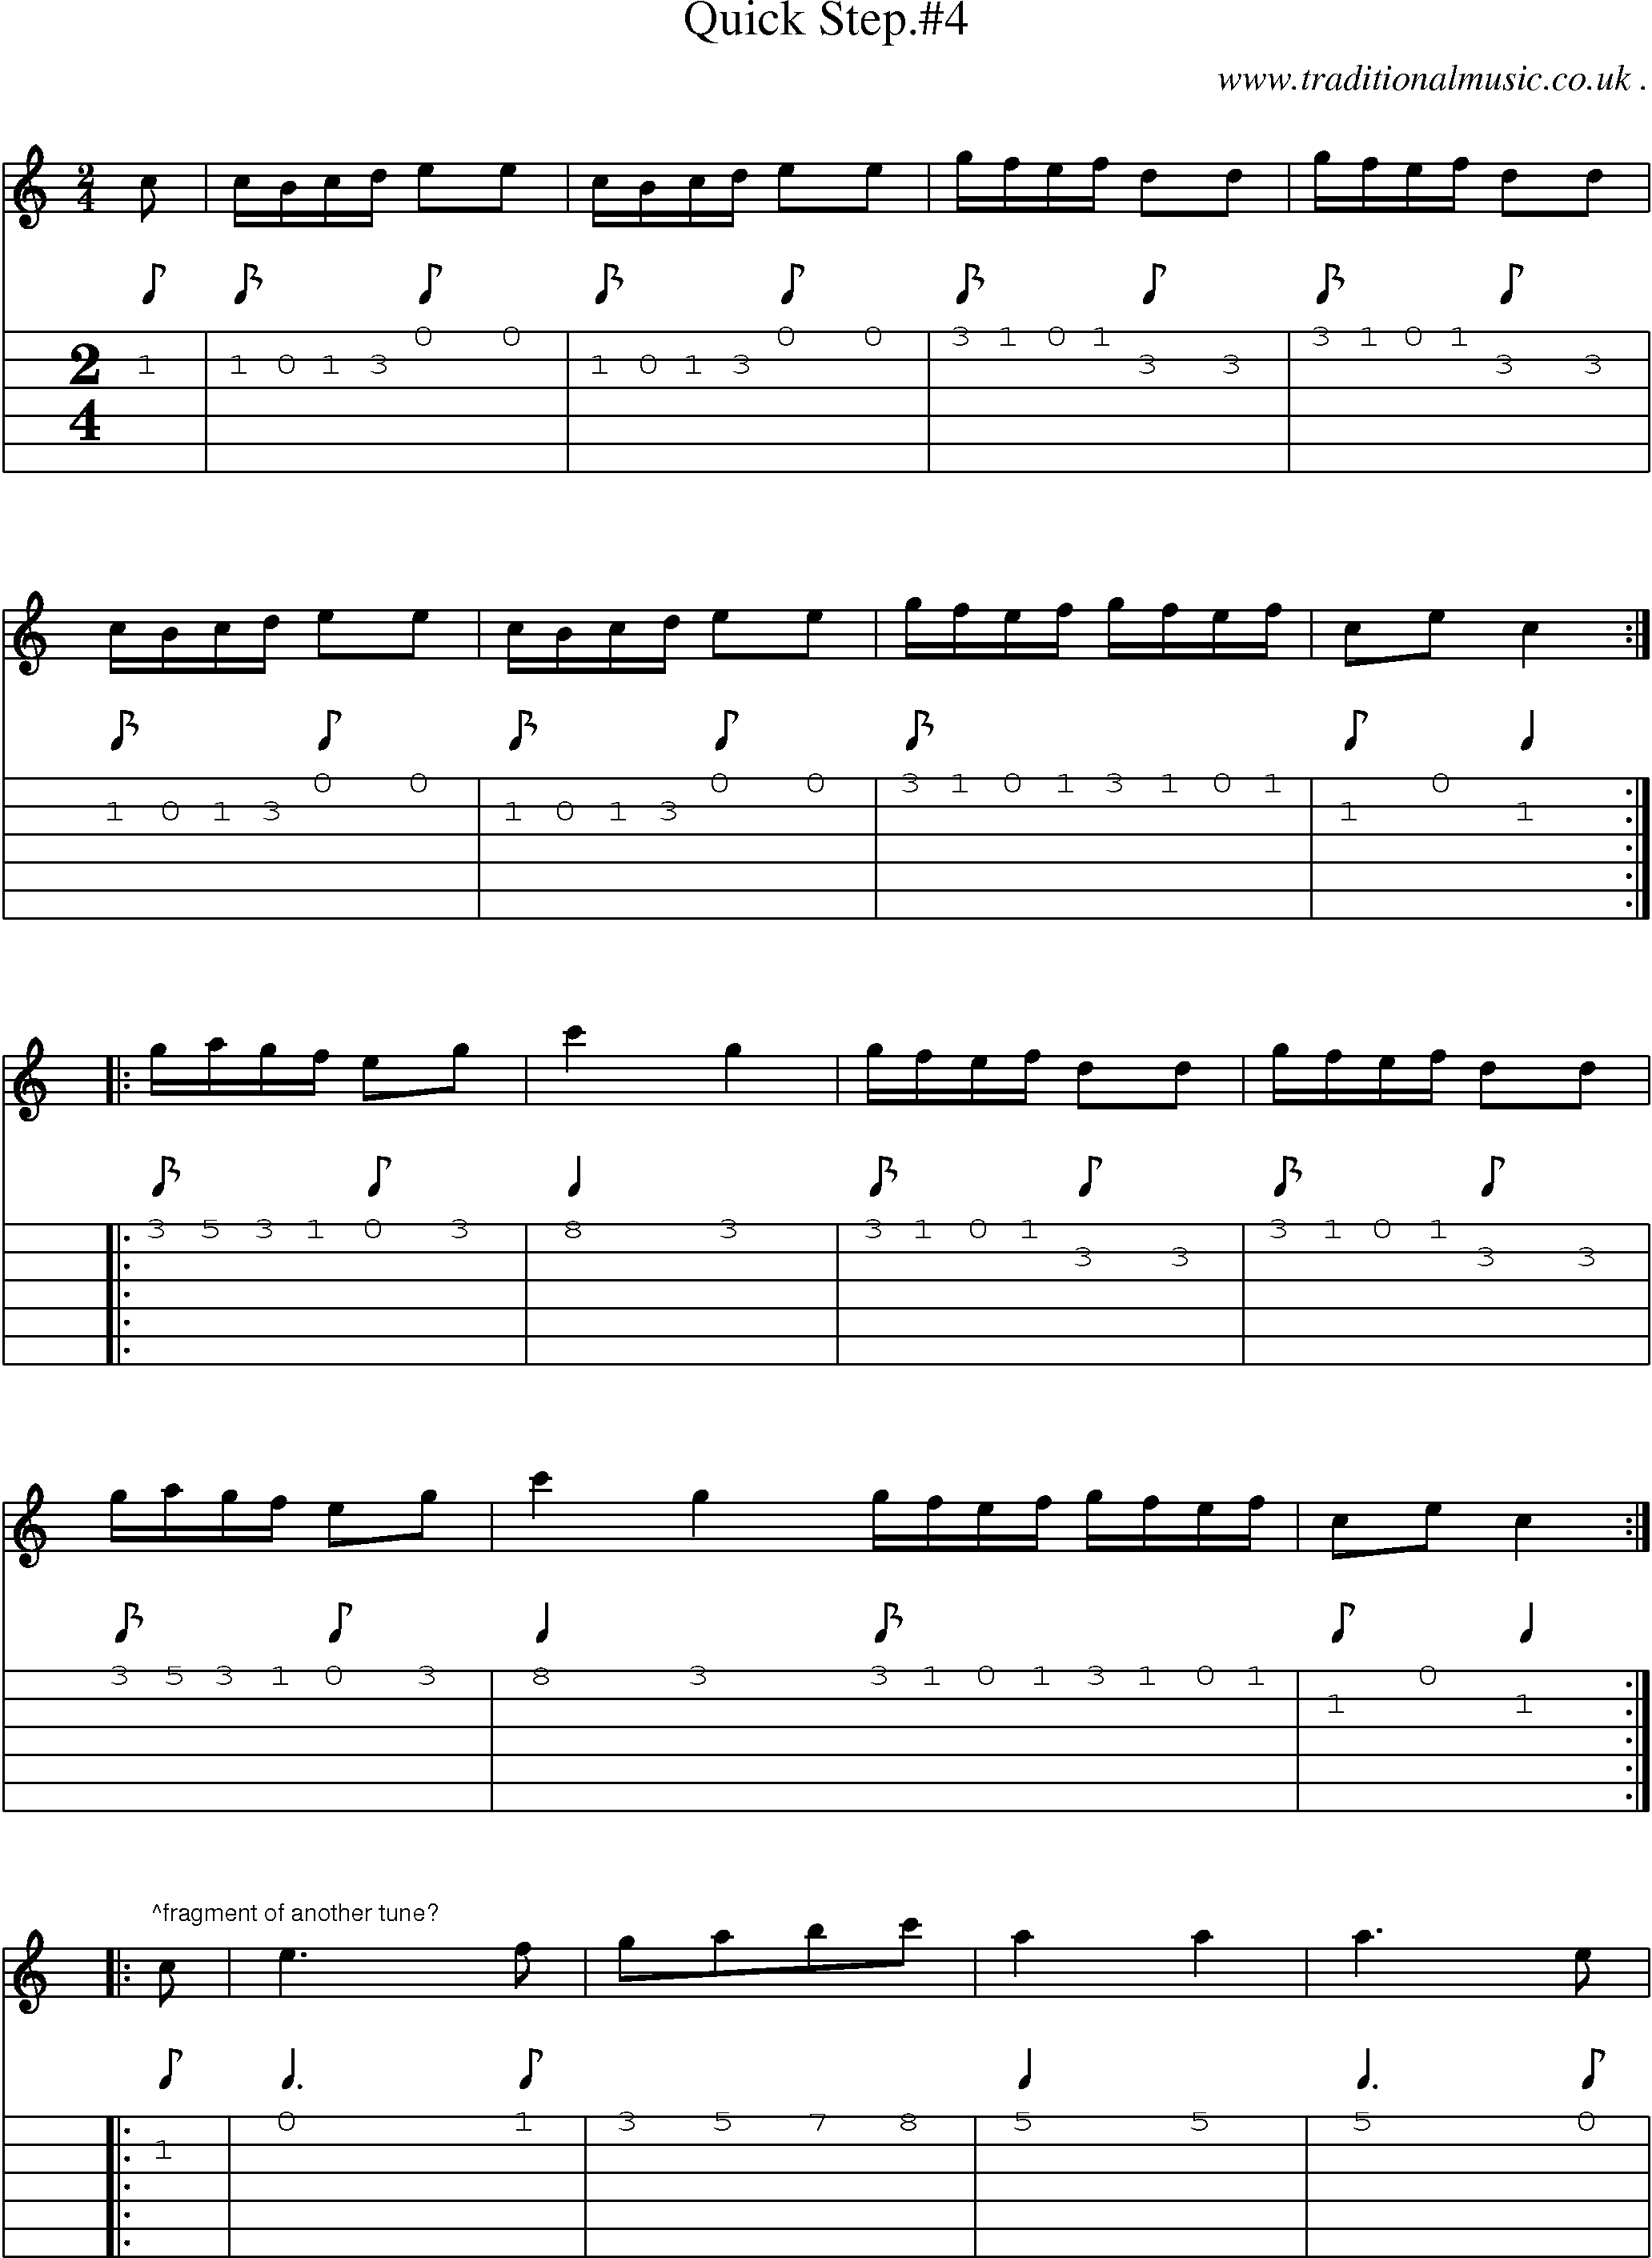 Sheet-Music and Guitar Tabs for Quick Step4